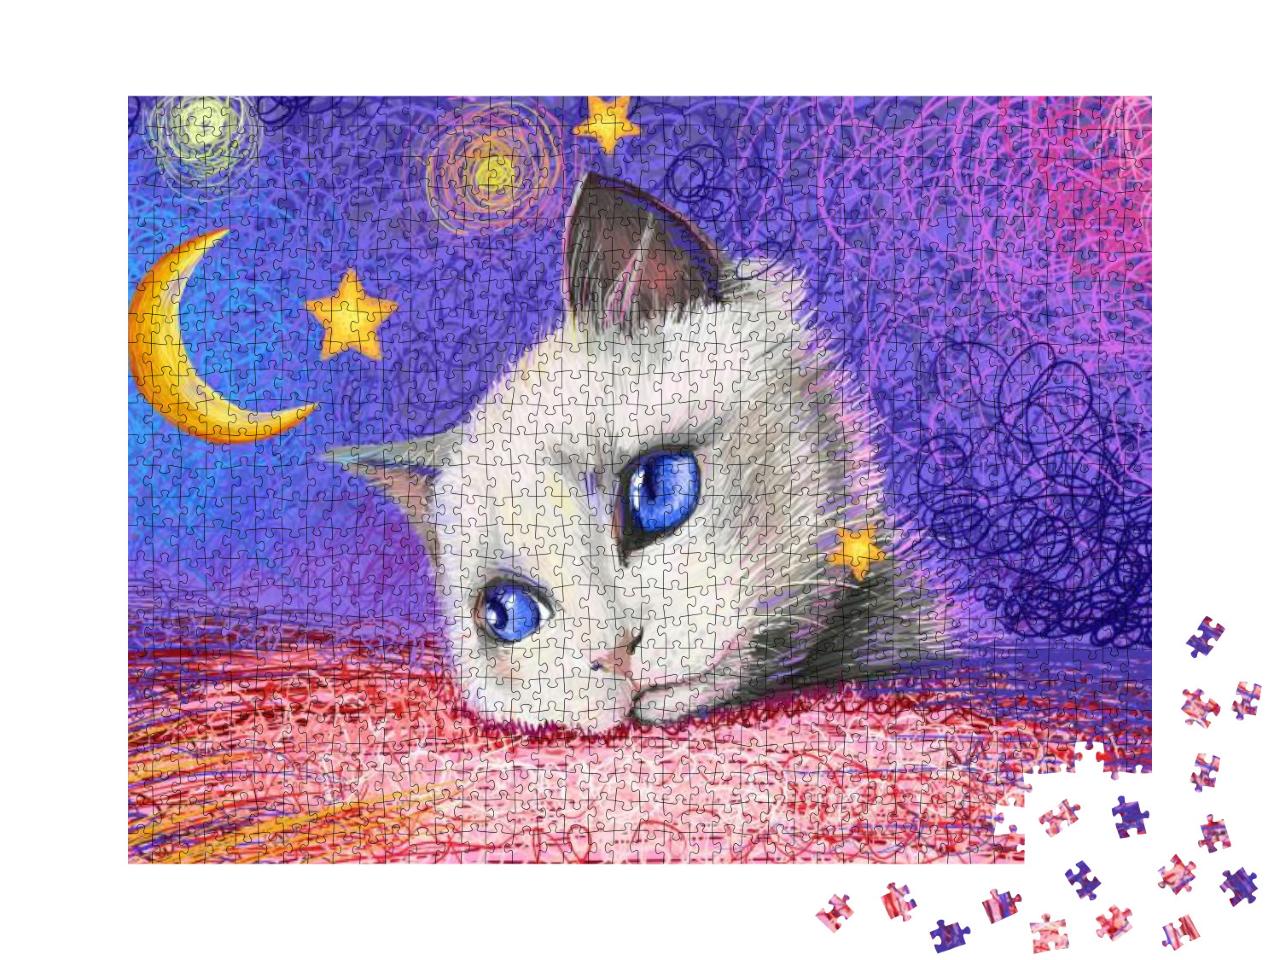 Drawn Illustration of a White Cat Head on a Bright Backgr... Jigsaw Puzzle with 1000 pieces